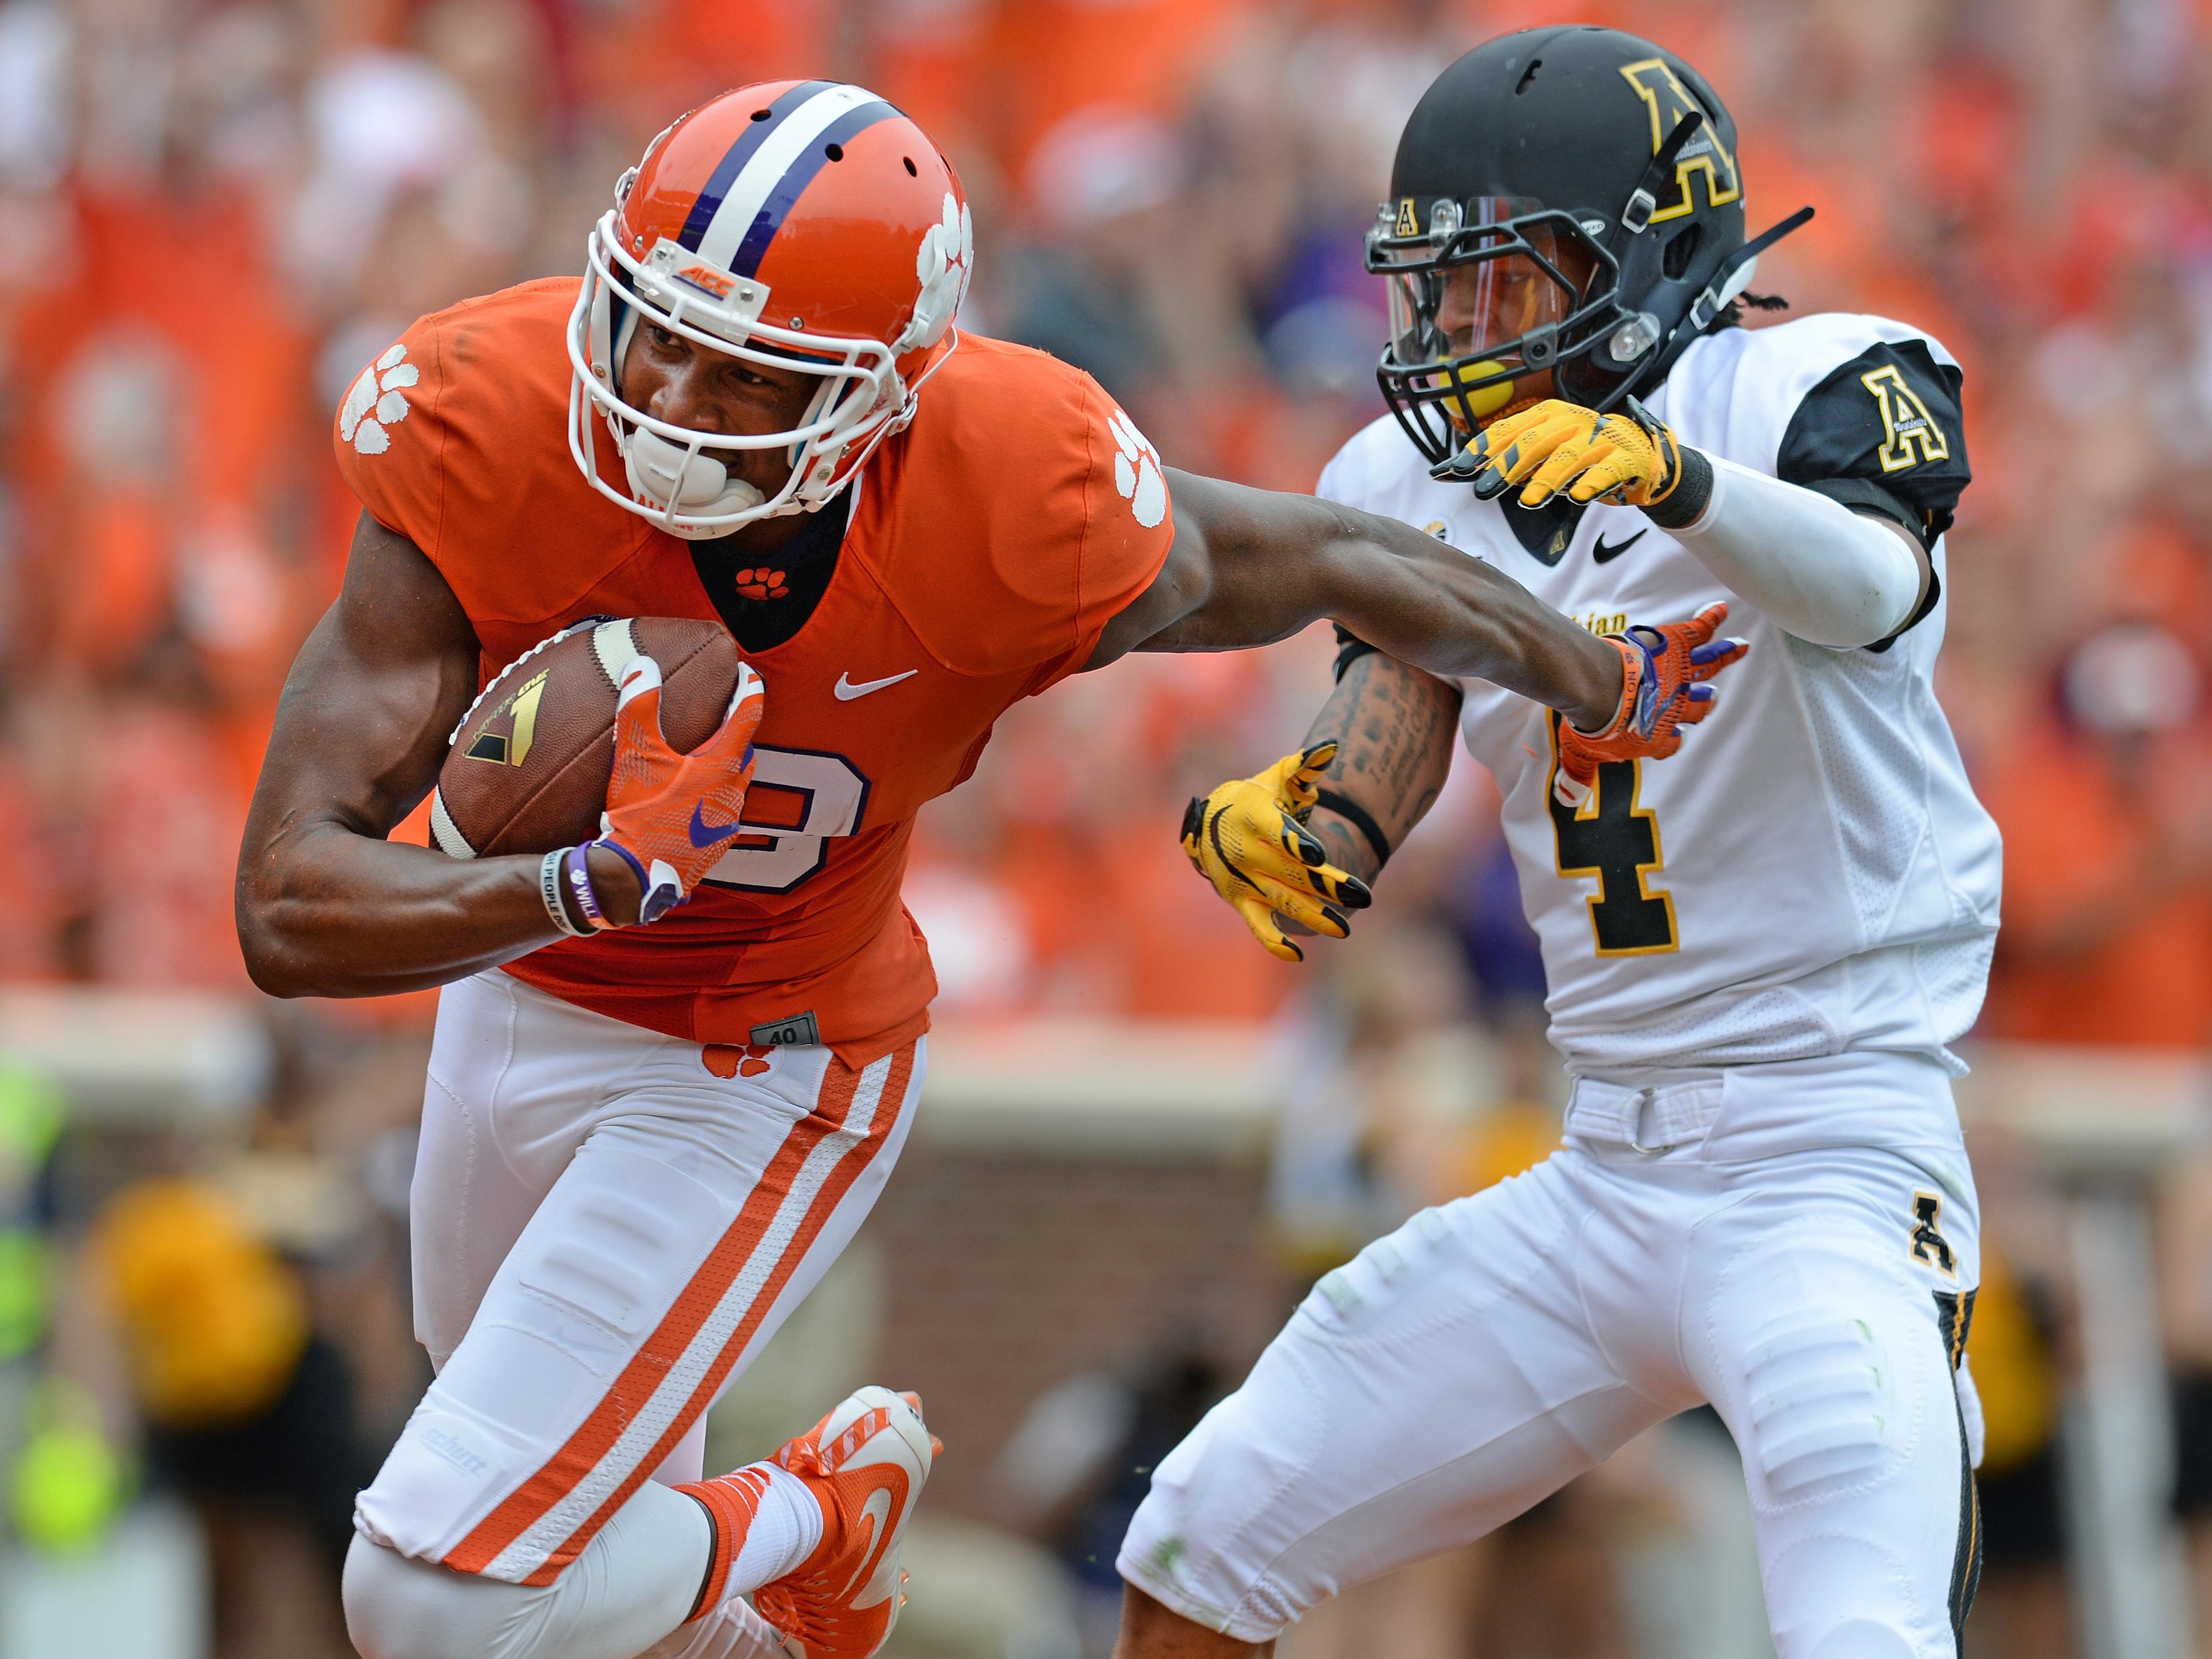 Clemson wide receiver Charone Peake (19) catches a TD past Appalachian State defensive back Mondo Williams (4) during the 2nd quarter Saturday, September 12, 2015 at Clemson's Memorial Stadium.